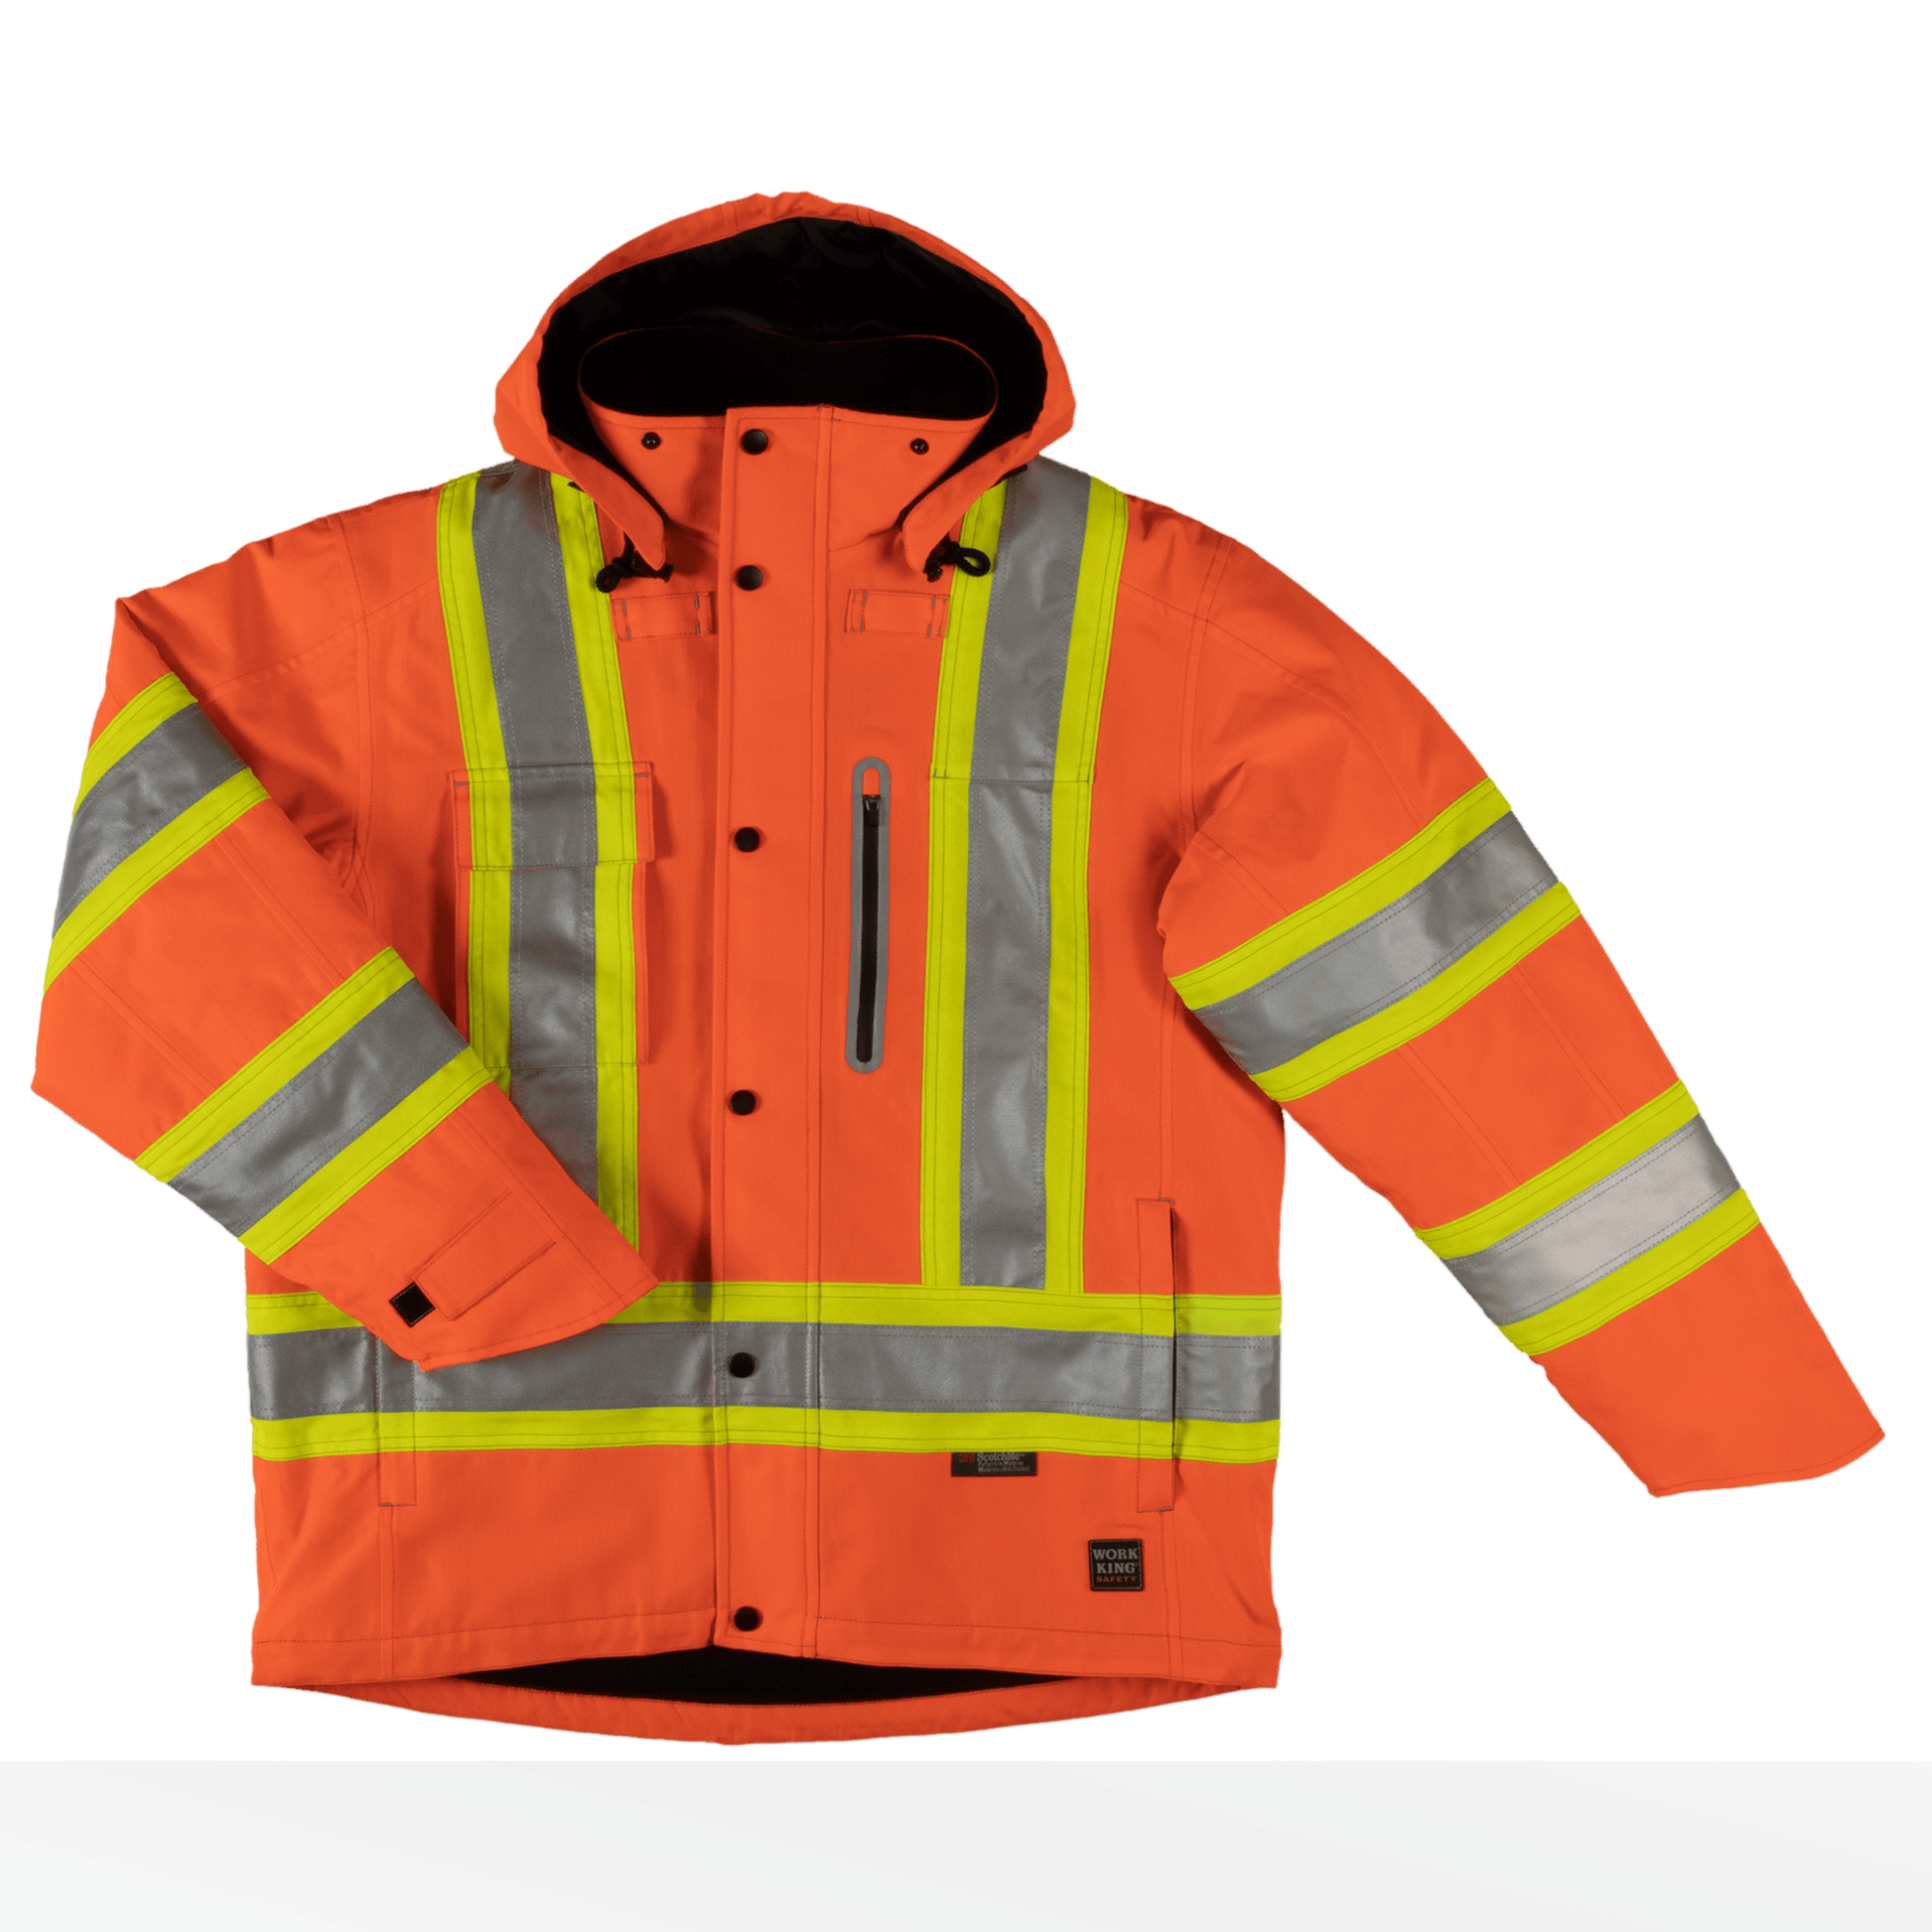 Tough Duck Fleece Lined Safety Jacket - S245 - Solid Orange